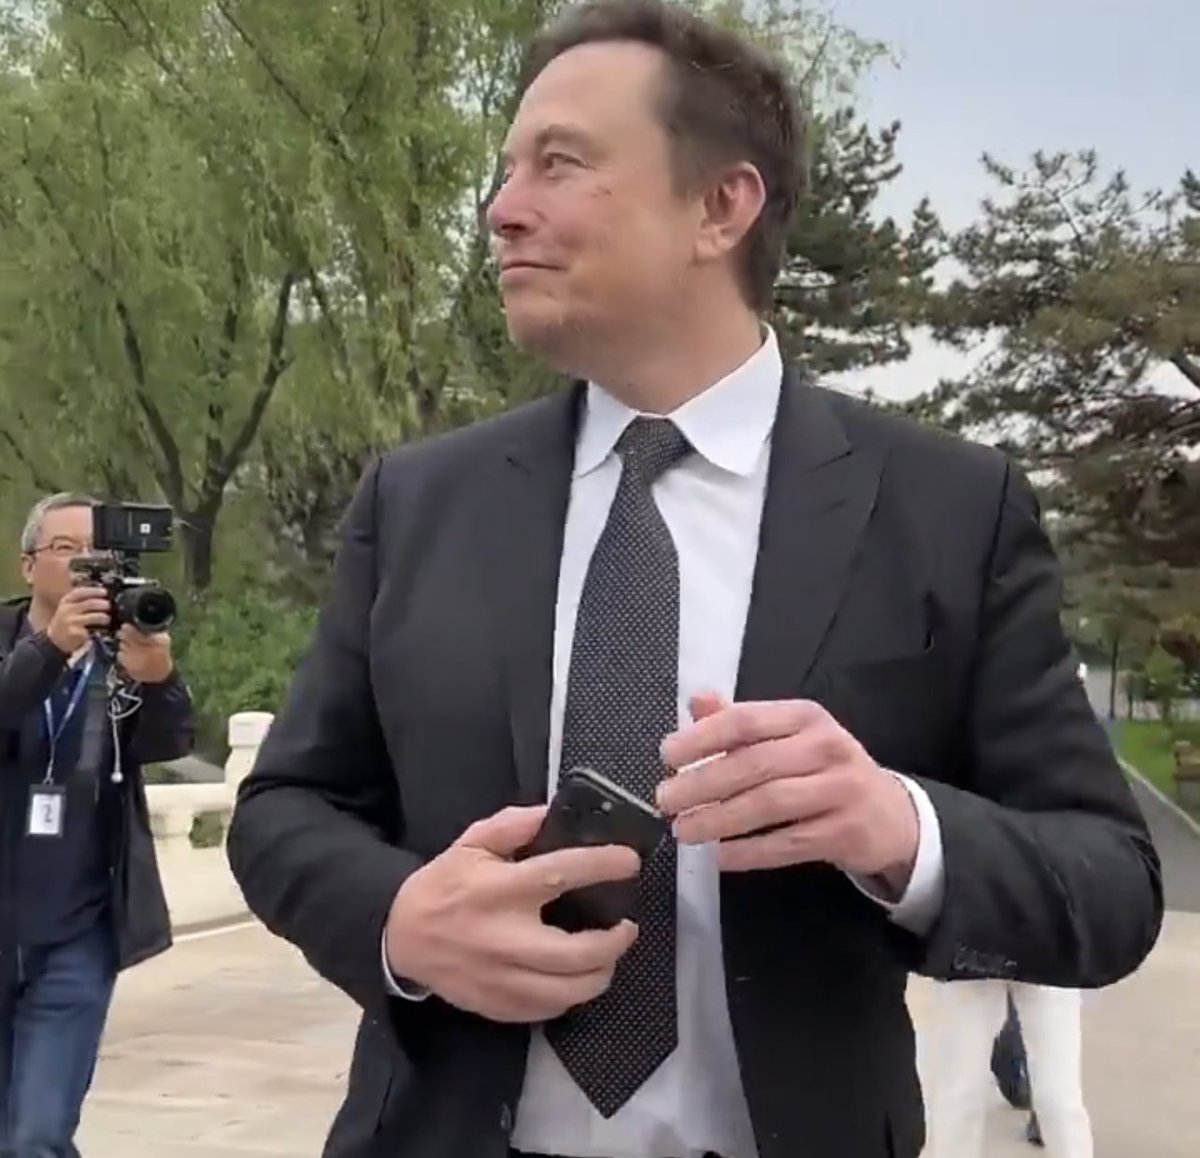 You see @elonmusk in public. What do you say?